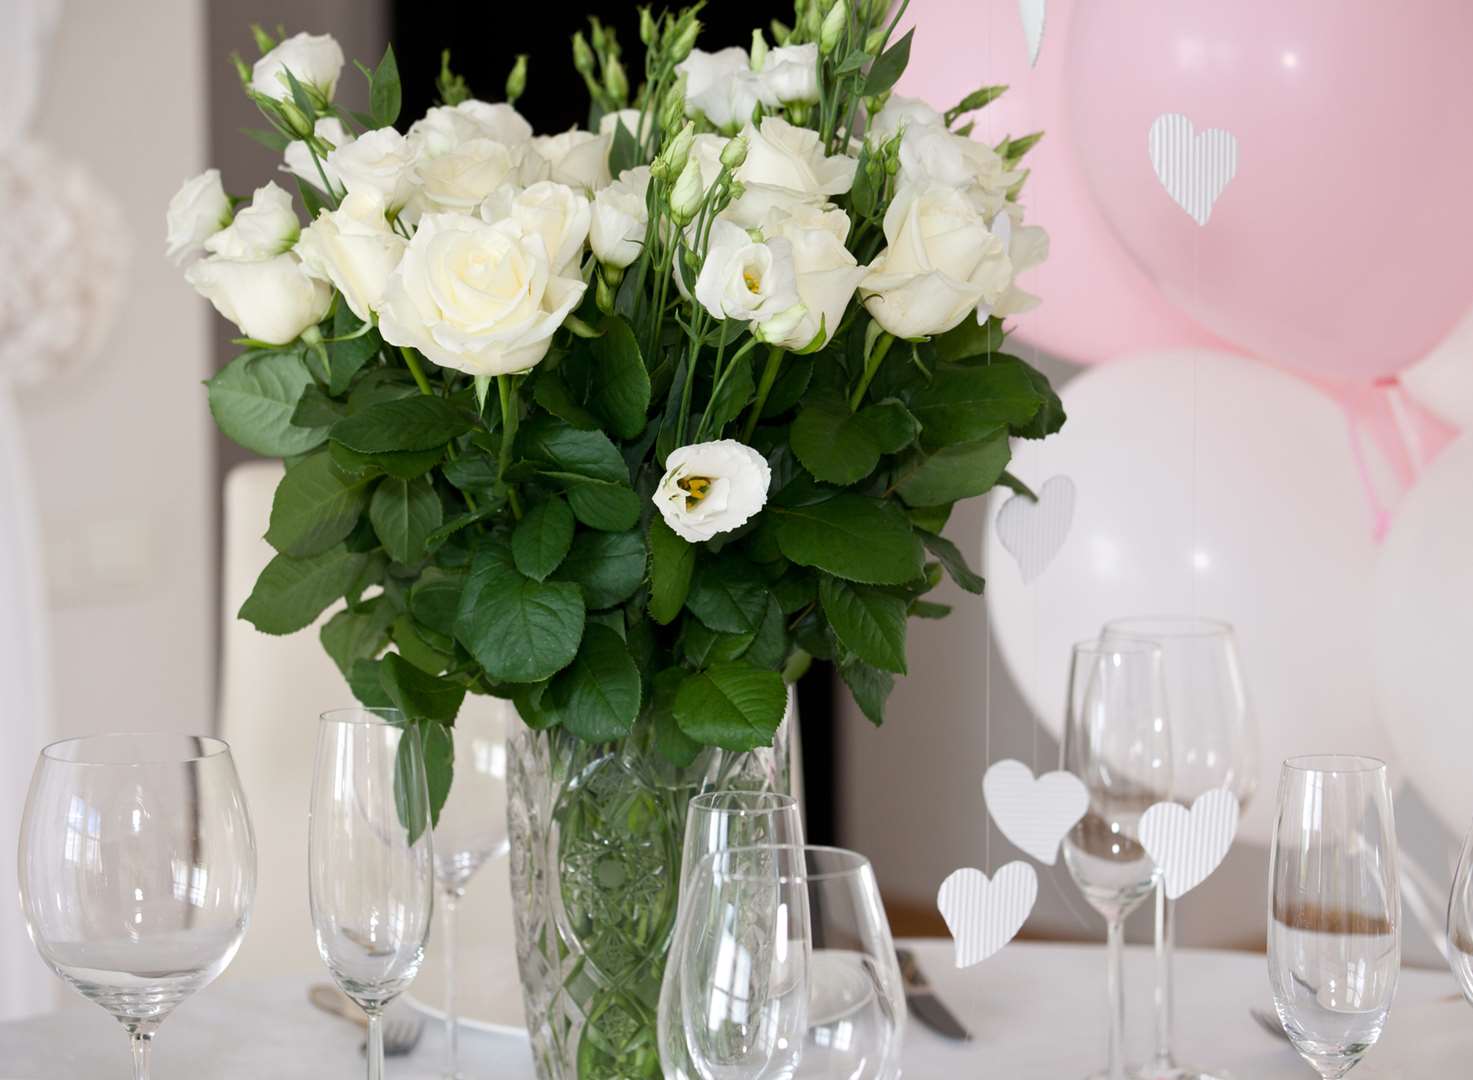 Blooms or balloons? How best do you decorate your big day?